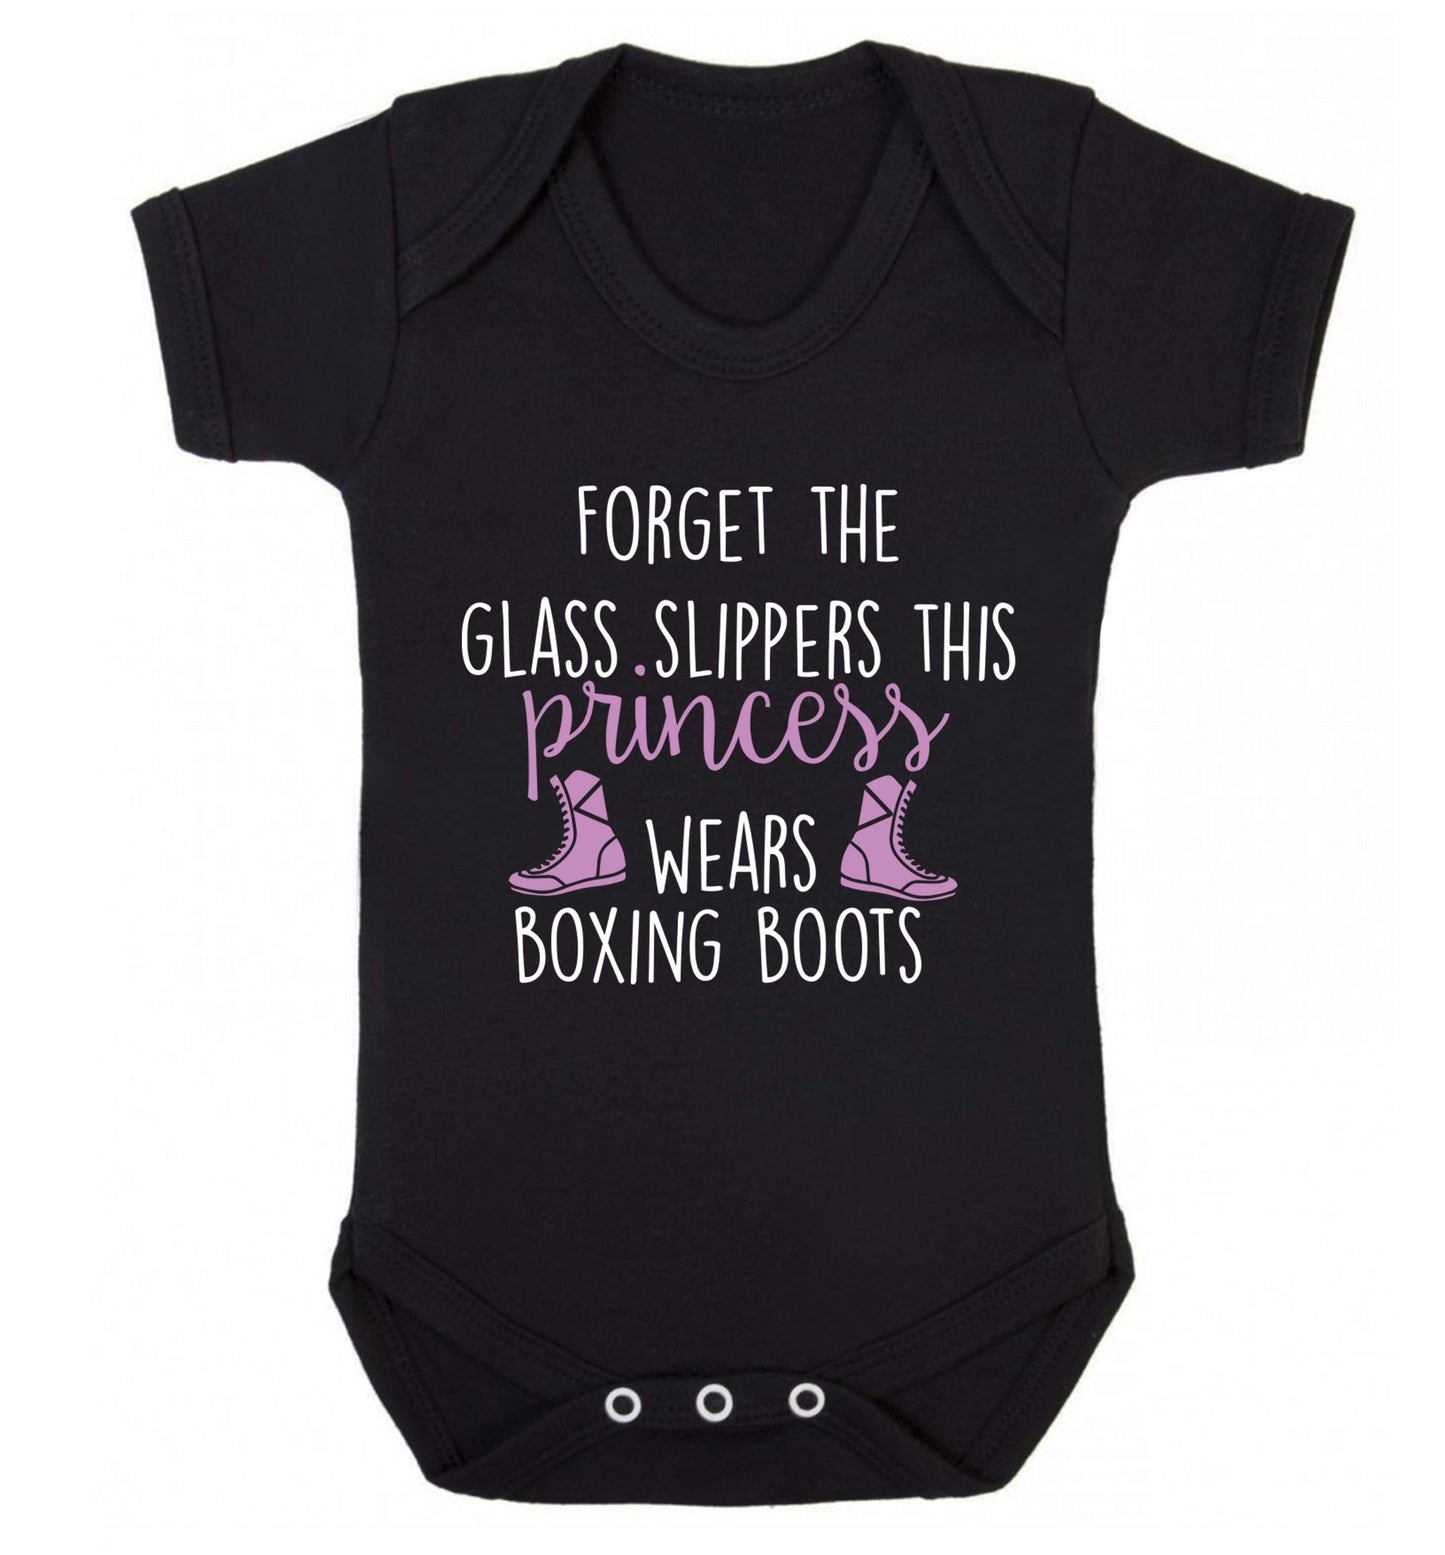 Forget the glass slippers this princess wears boxing boots Baby Vest black 18-24 months